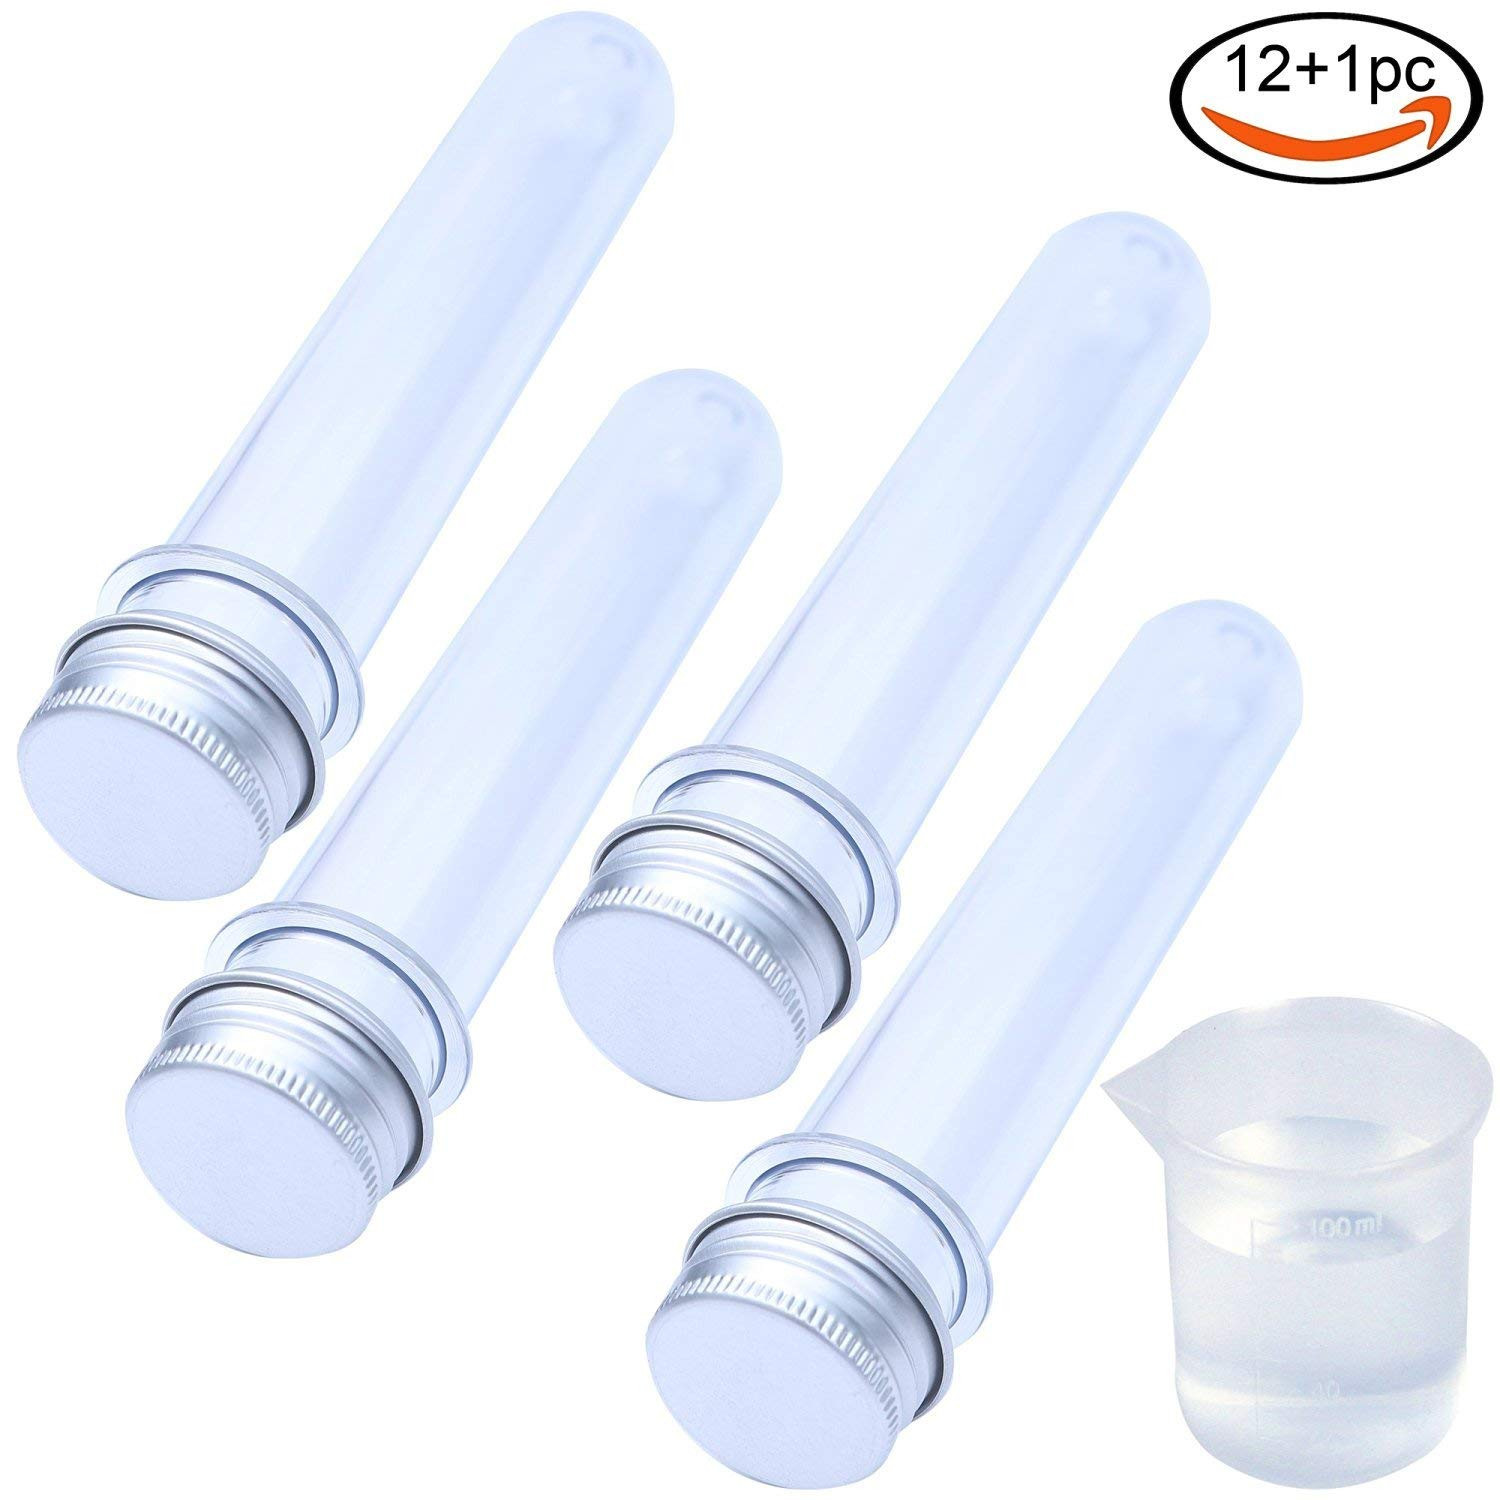 Tall Clear Plastic Vases Of Amazon Com Test Tubes Lab Tubes Industrial Scientific with Regard to Rainbow B 12 Clear Plastic Test Tubes with Screw Caps Bath Salt Containers